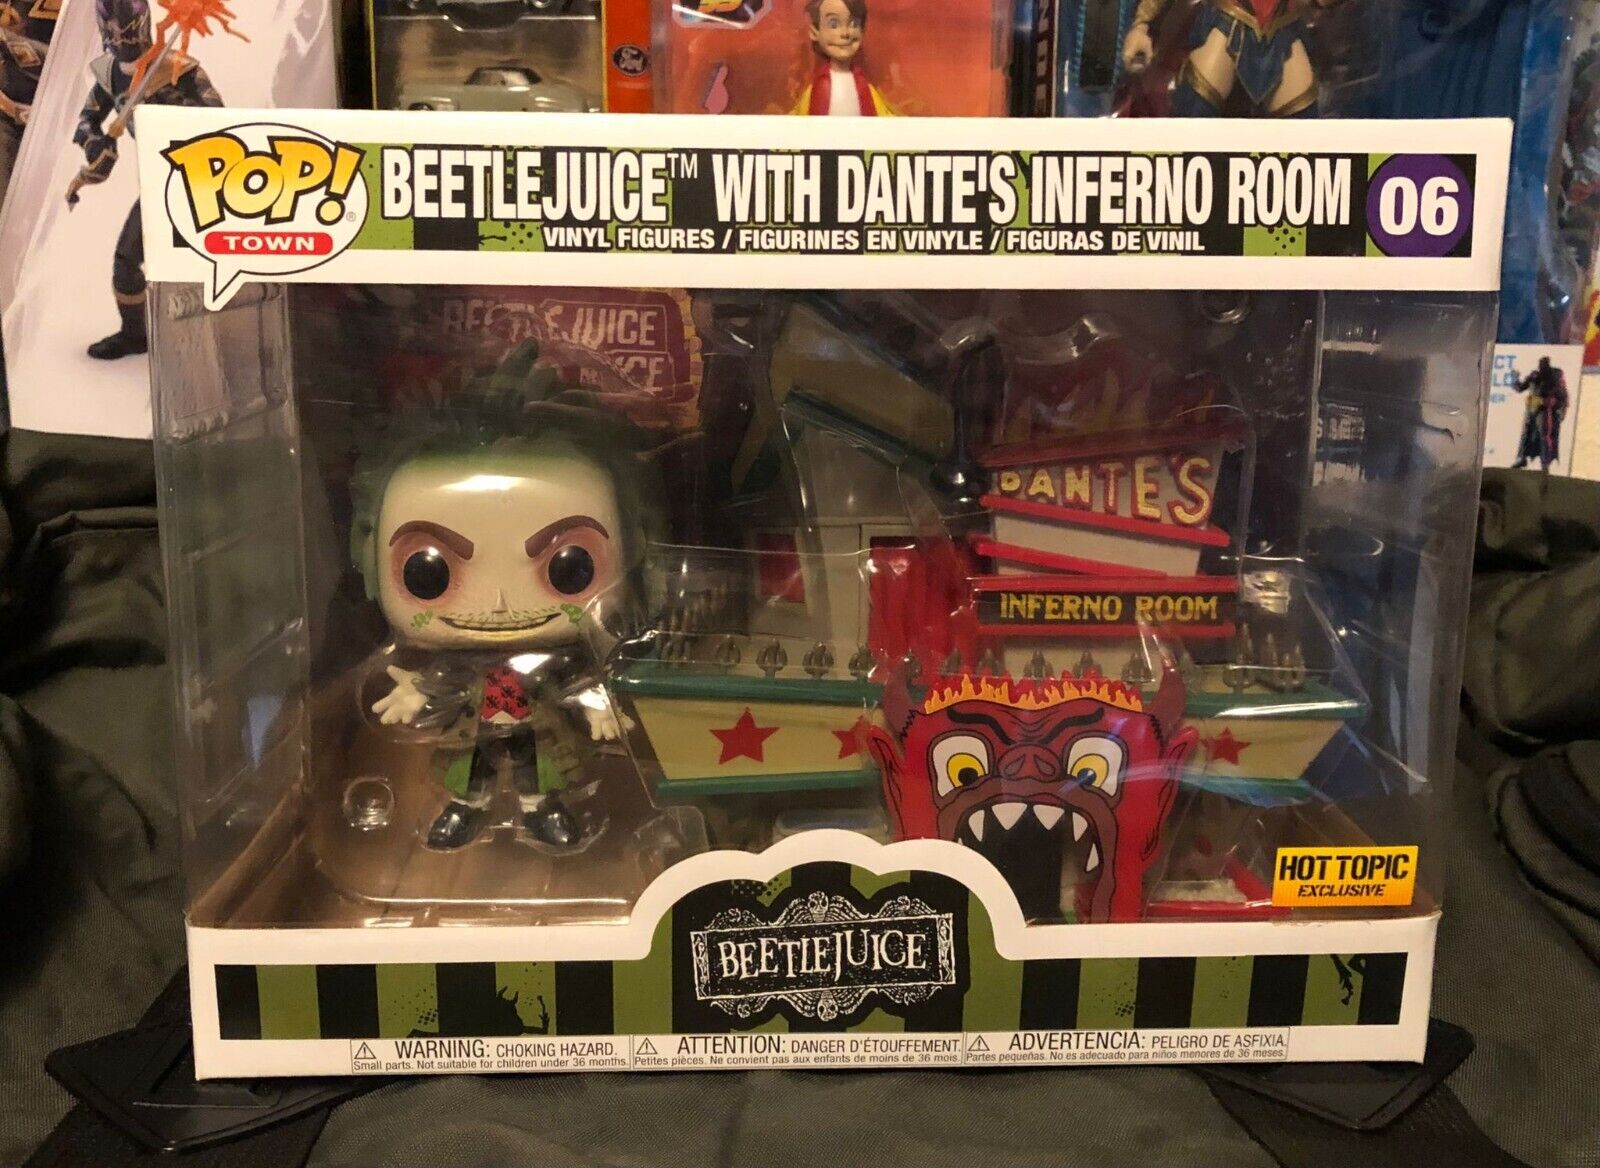 Funko Pop Town Beetlejuice With Dante's Inferno Room 06 Hot Topic Exclusive